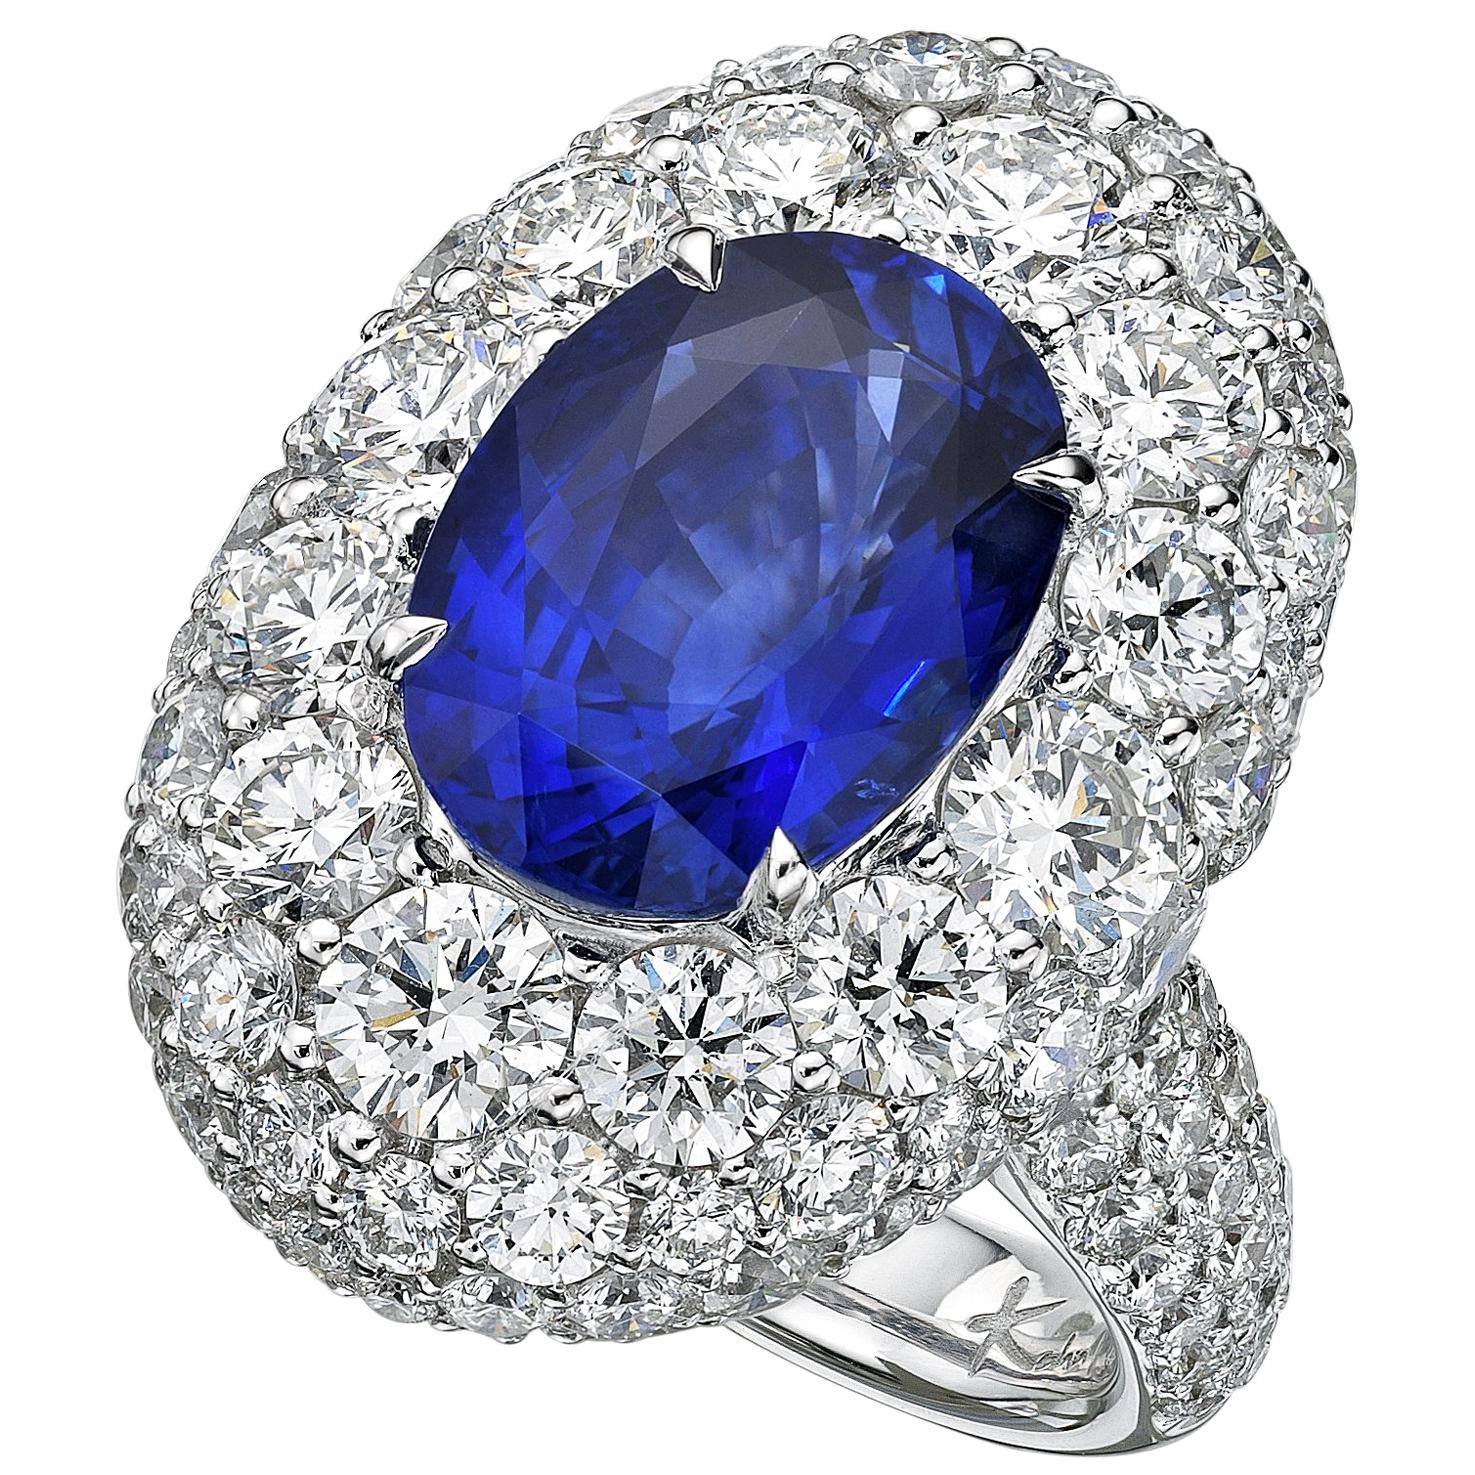 GRS Certified 6.24 Carat Ceylon Blue Sapphire Ring 'Heated' For Sale